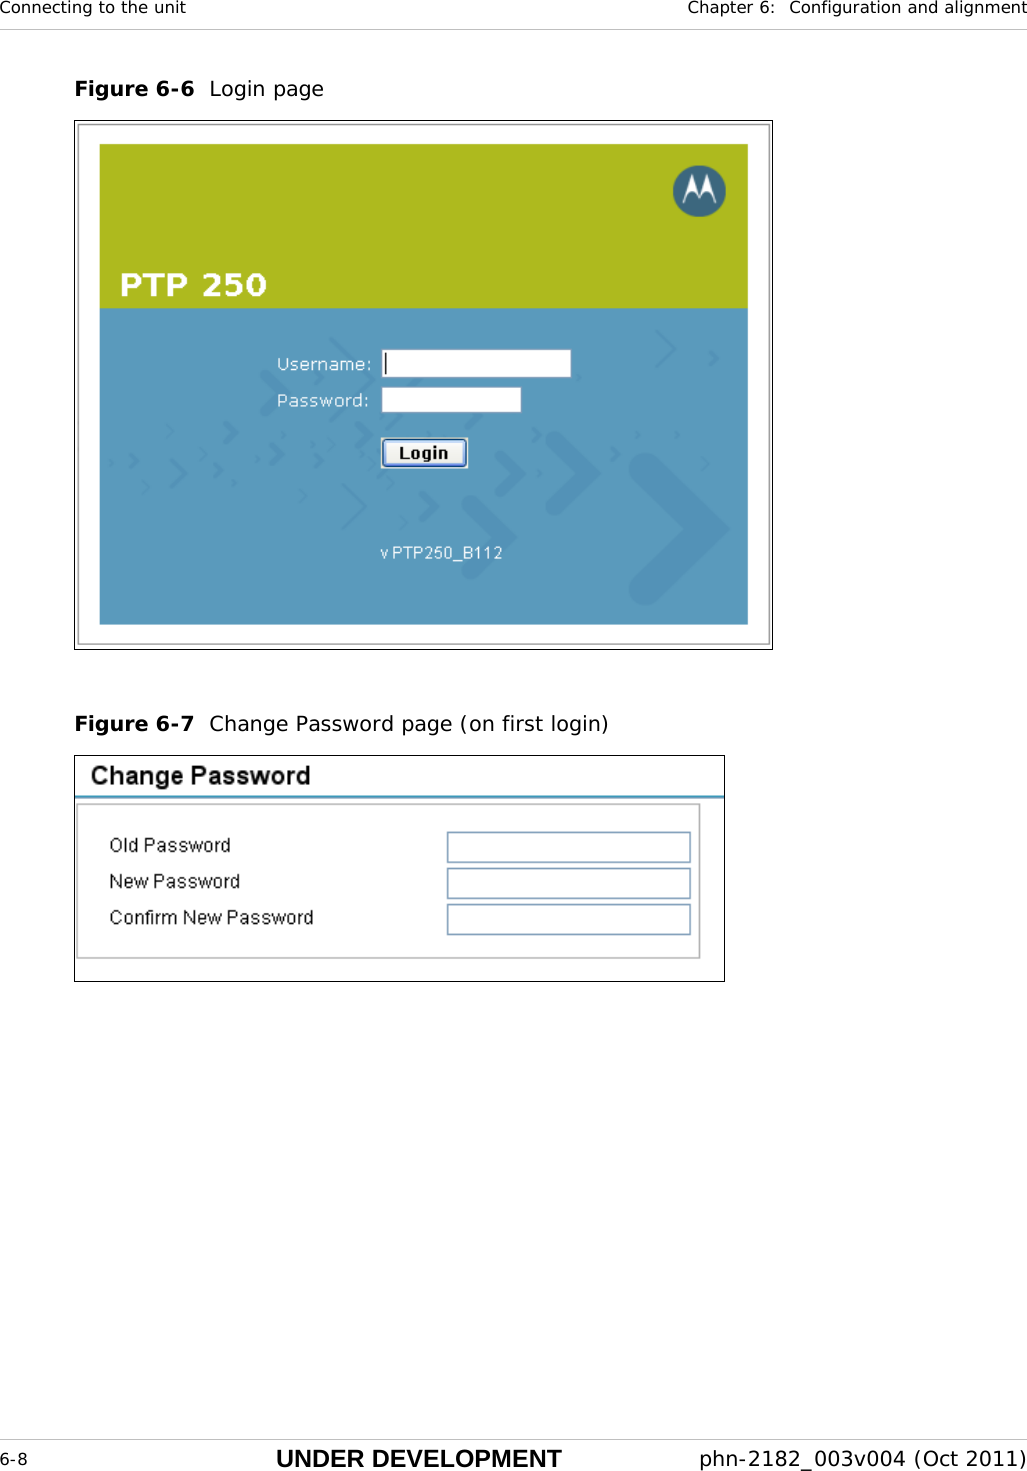 Connecting to the unit  Chapter 6:  Configuration and alignment  6-8 UNDER DEVELOPMENT  phn-2182_003v004 (Oct 2011)  Figure 6-6  Login page   Figure 6-7  Change Password page (on first login)   